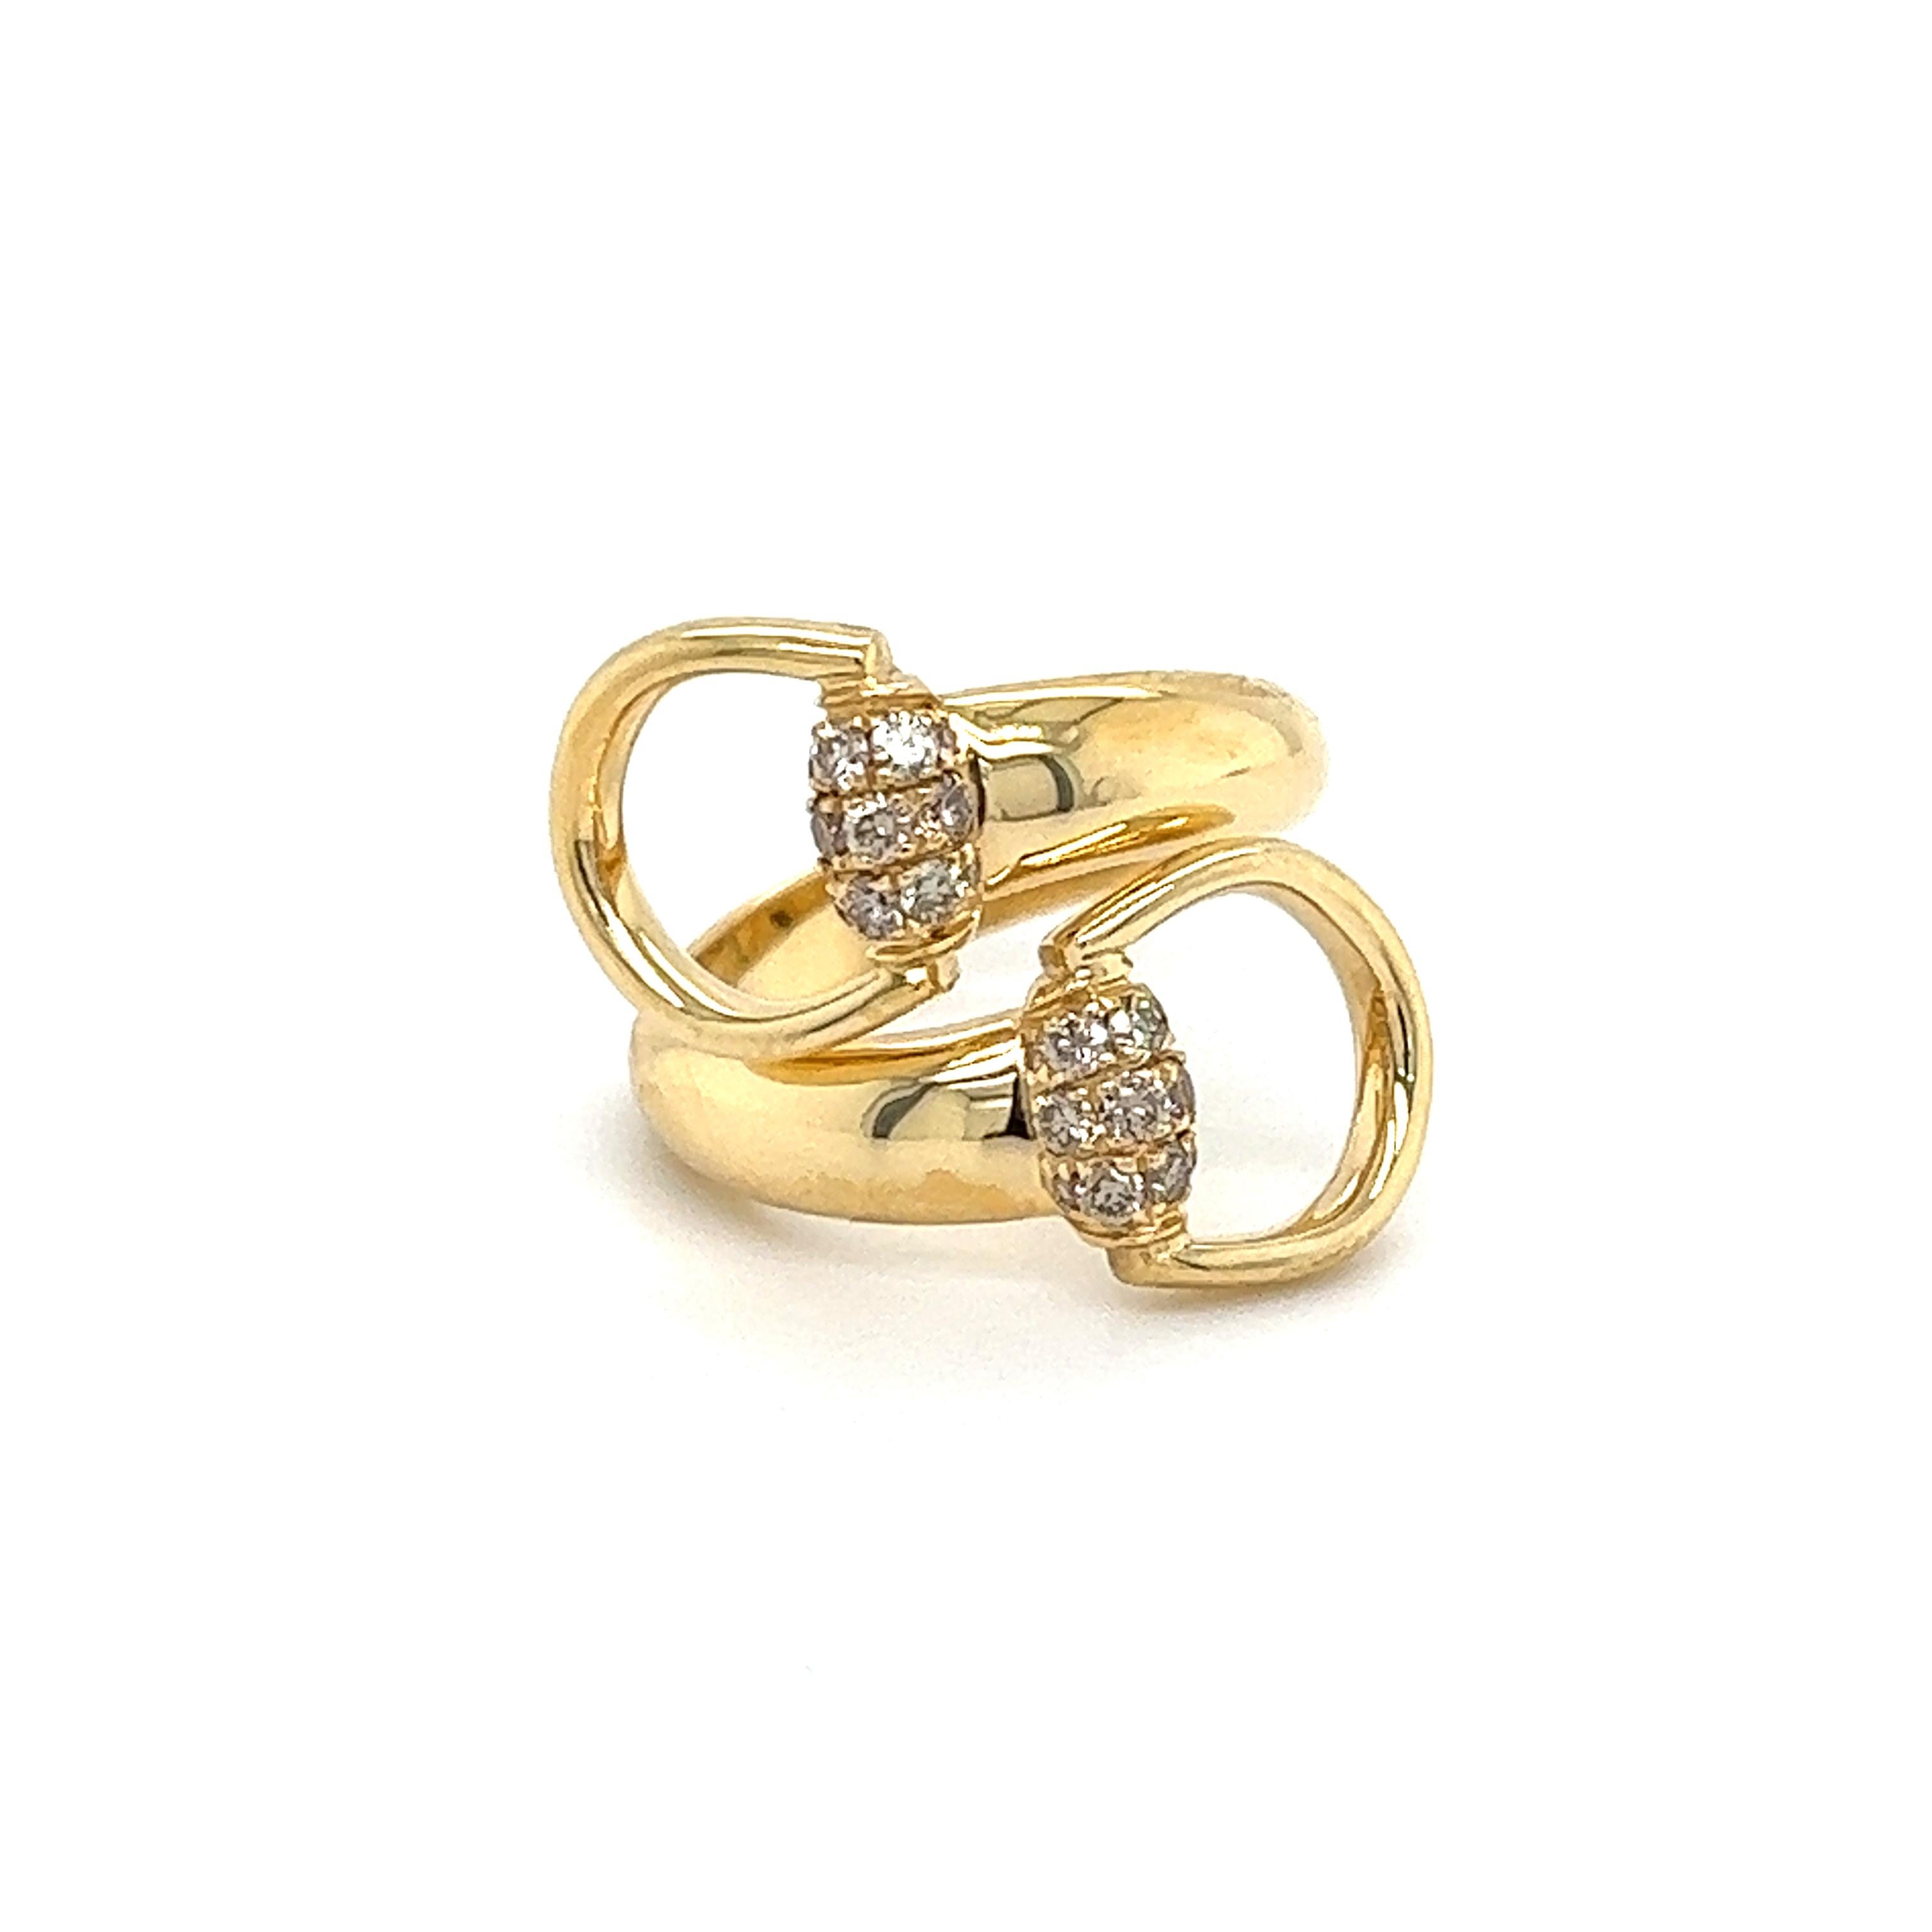 Beautiful ring by famed designer Gucci. Crafted in 18k Gold, this stunning ring features 24 round brilliant cut champagne colored diamonds weighing approximately 0.45 carat. Gucci's iconic Horsebit design highlights the ring as two crossover and lay